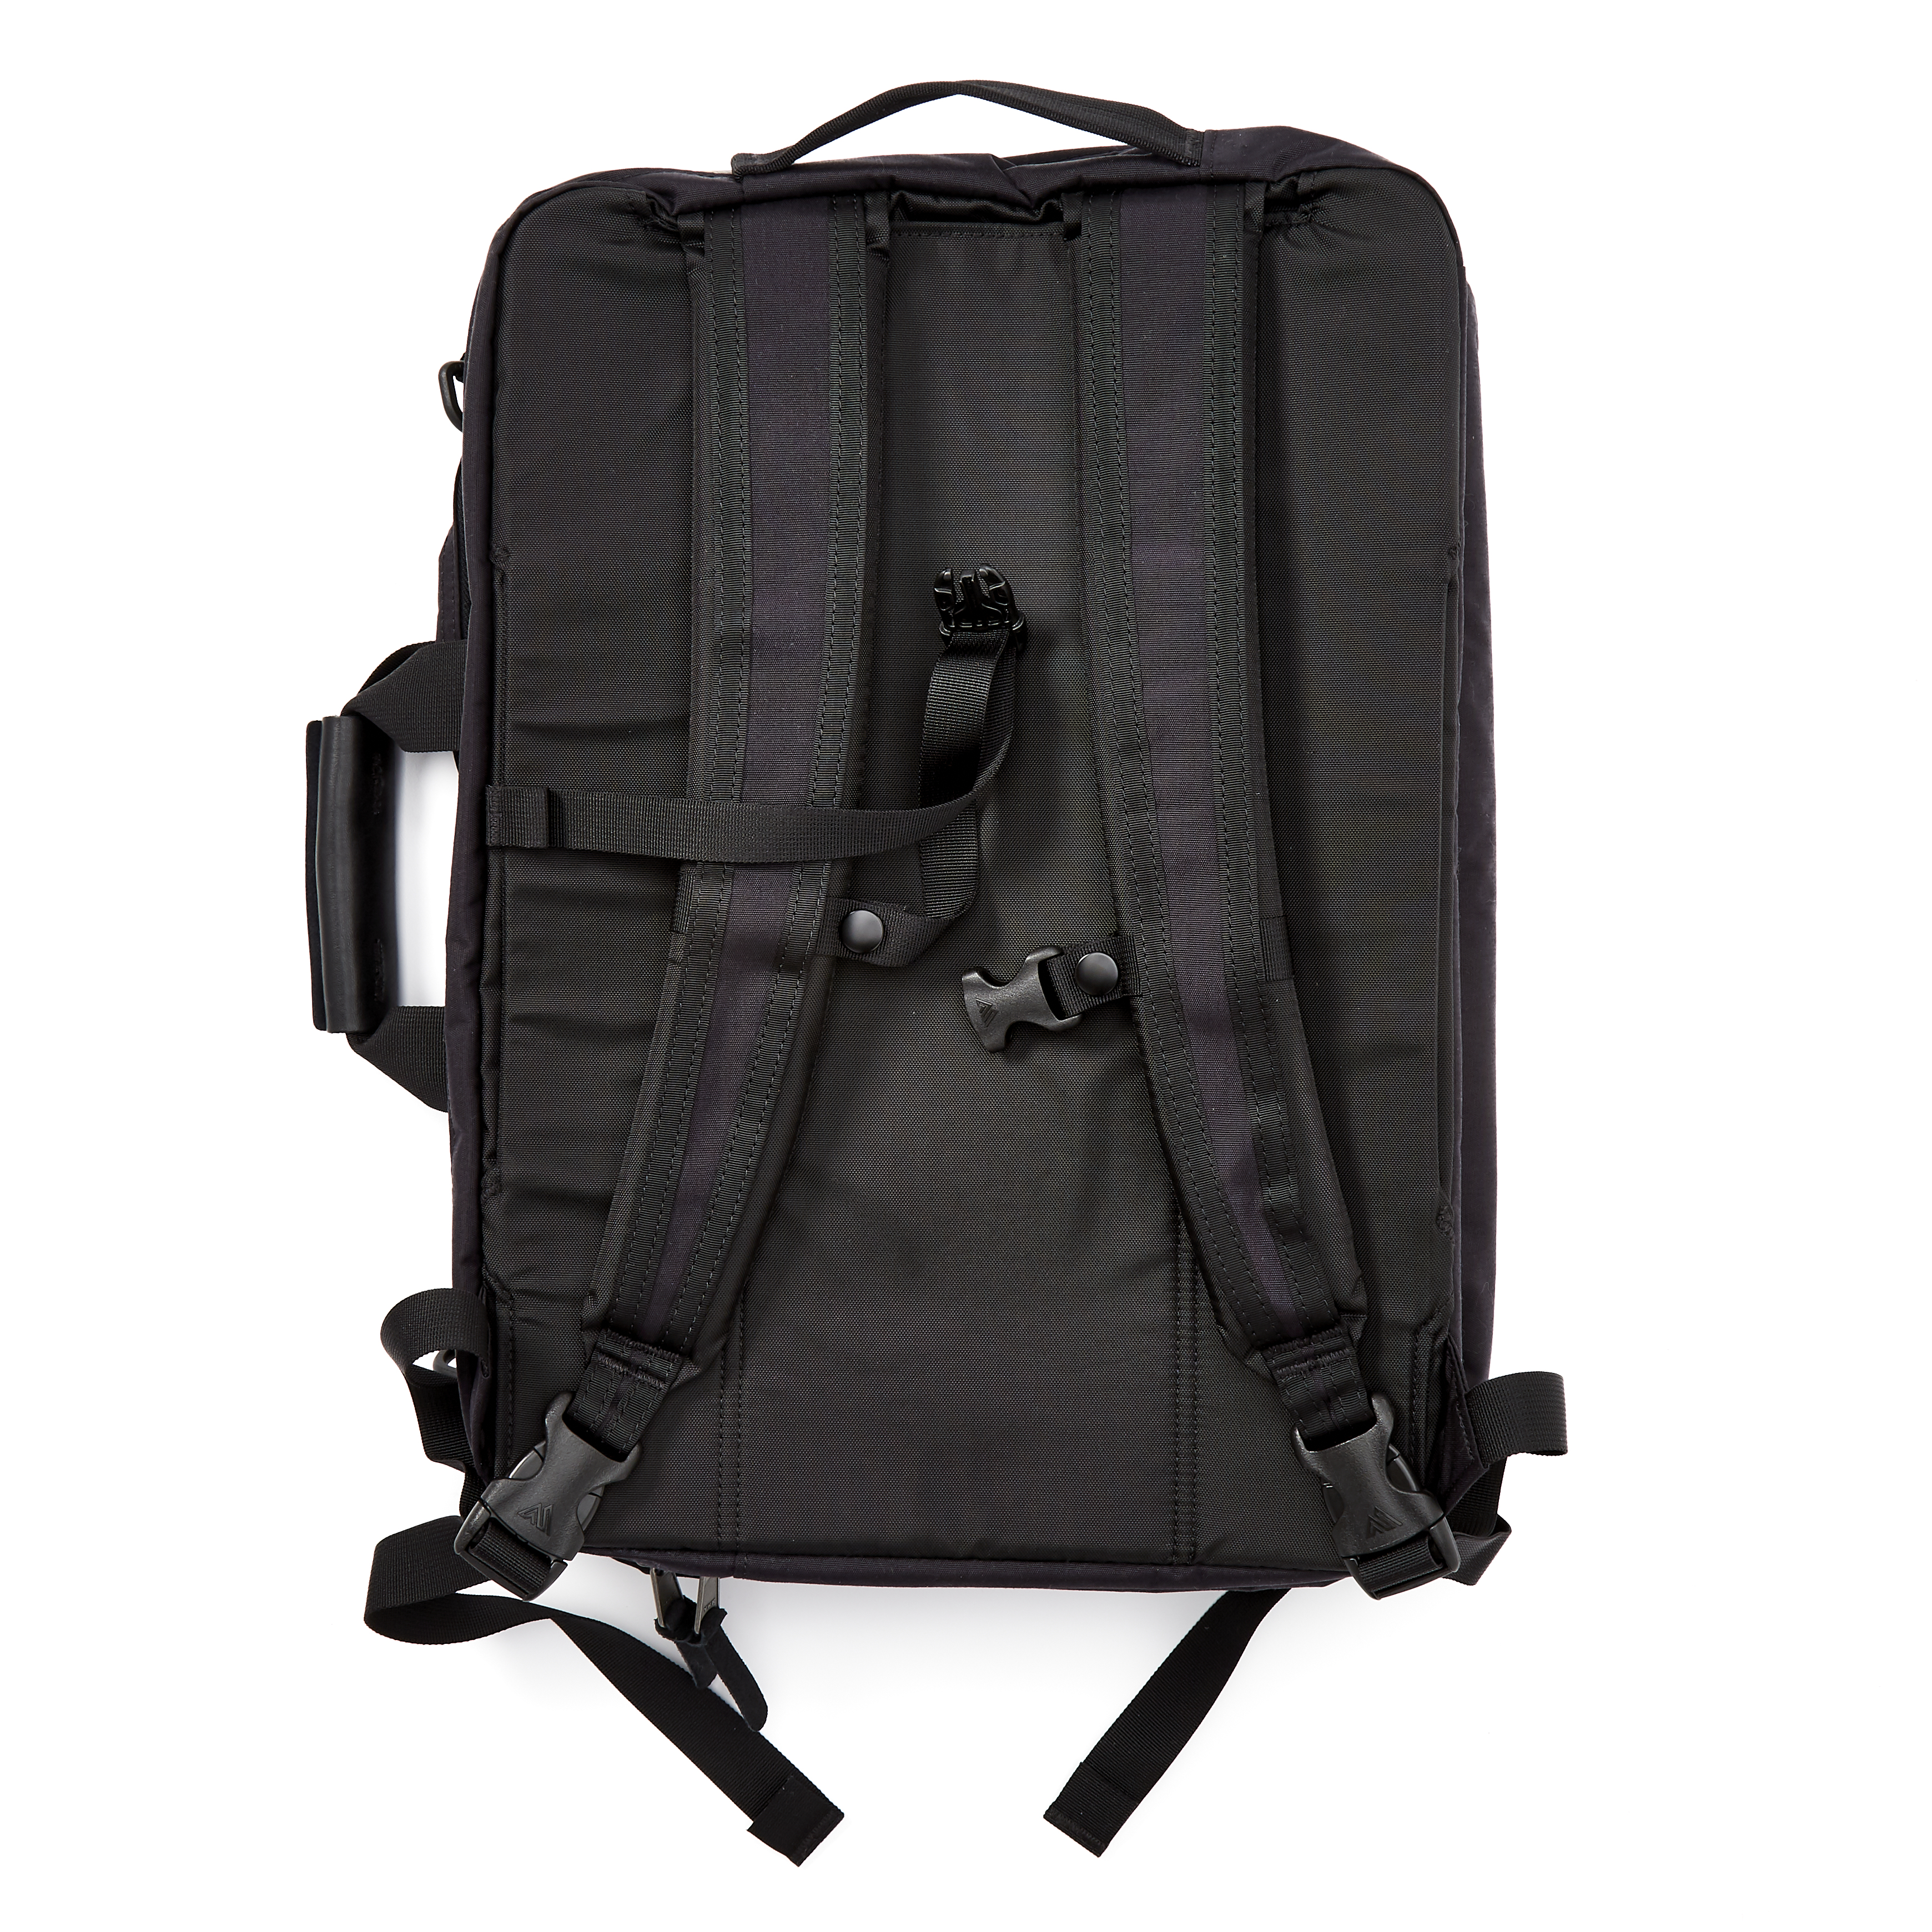 Covert Overnight Mission - Briefcase Backpack Hybrid